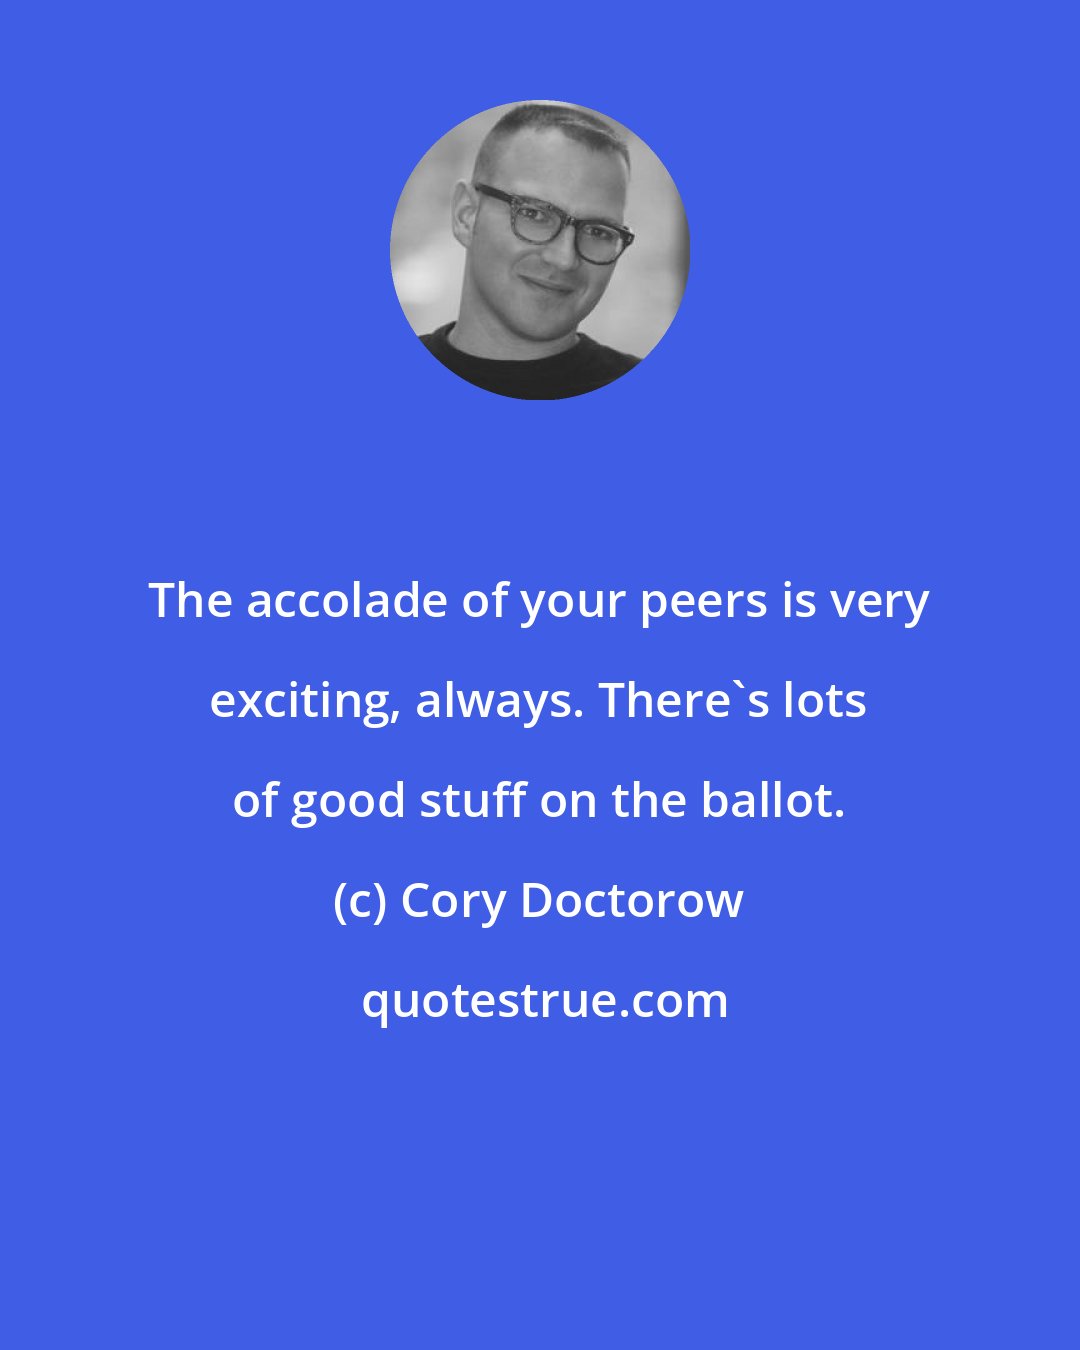 Cory Doctorow: The accolade of your peers is very exciting, always. There's lots of good stuff on the ballot.